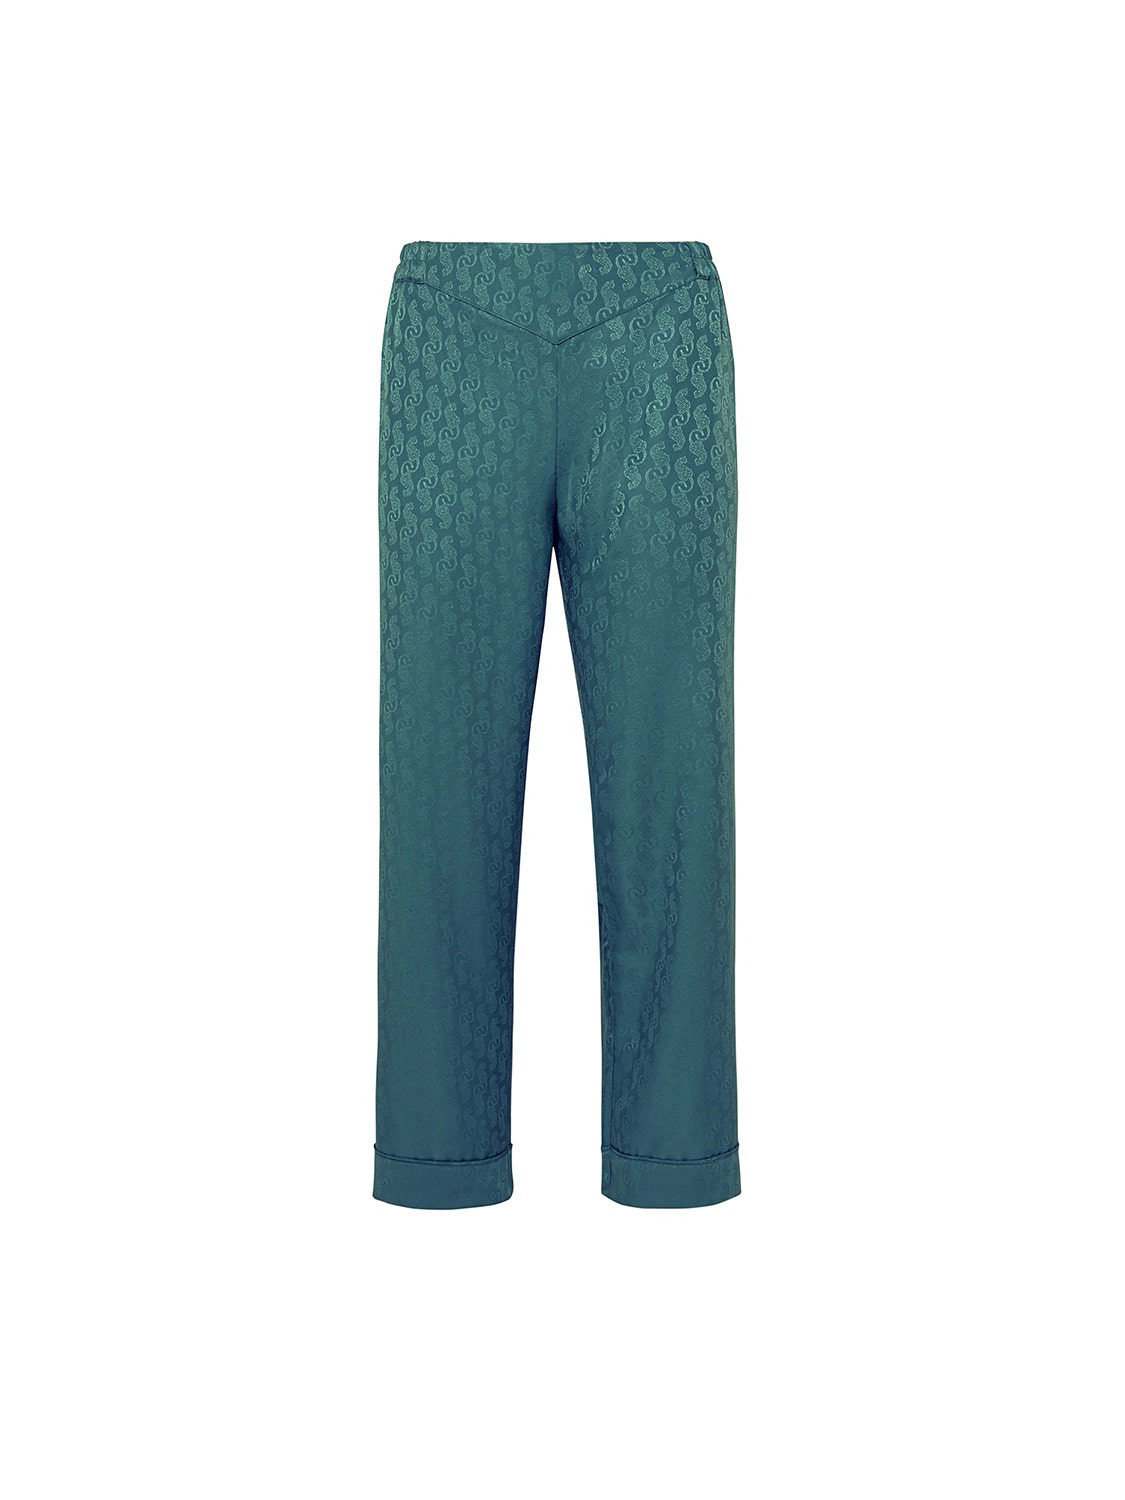 trousers-boreal-green-caprice-40